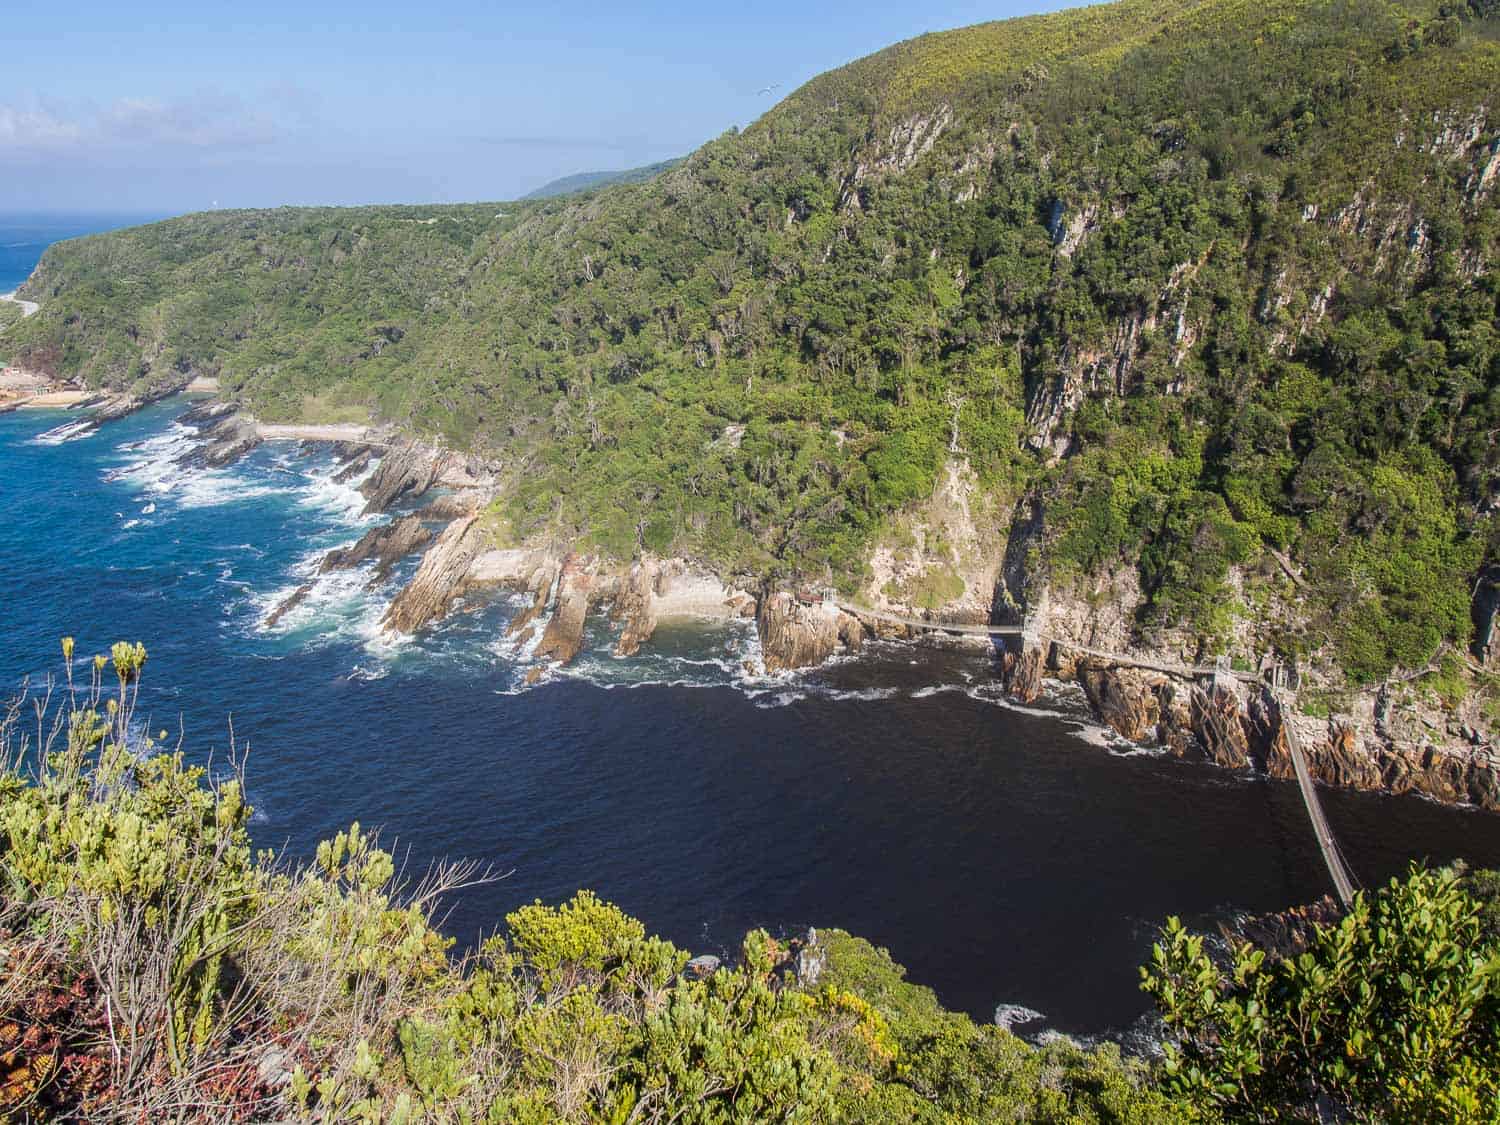 Hiking in Storms River Mouth on South Africa's Garden Route road trip